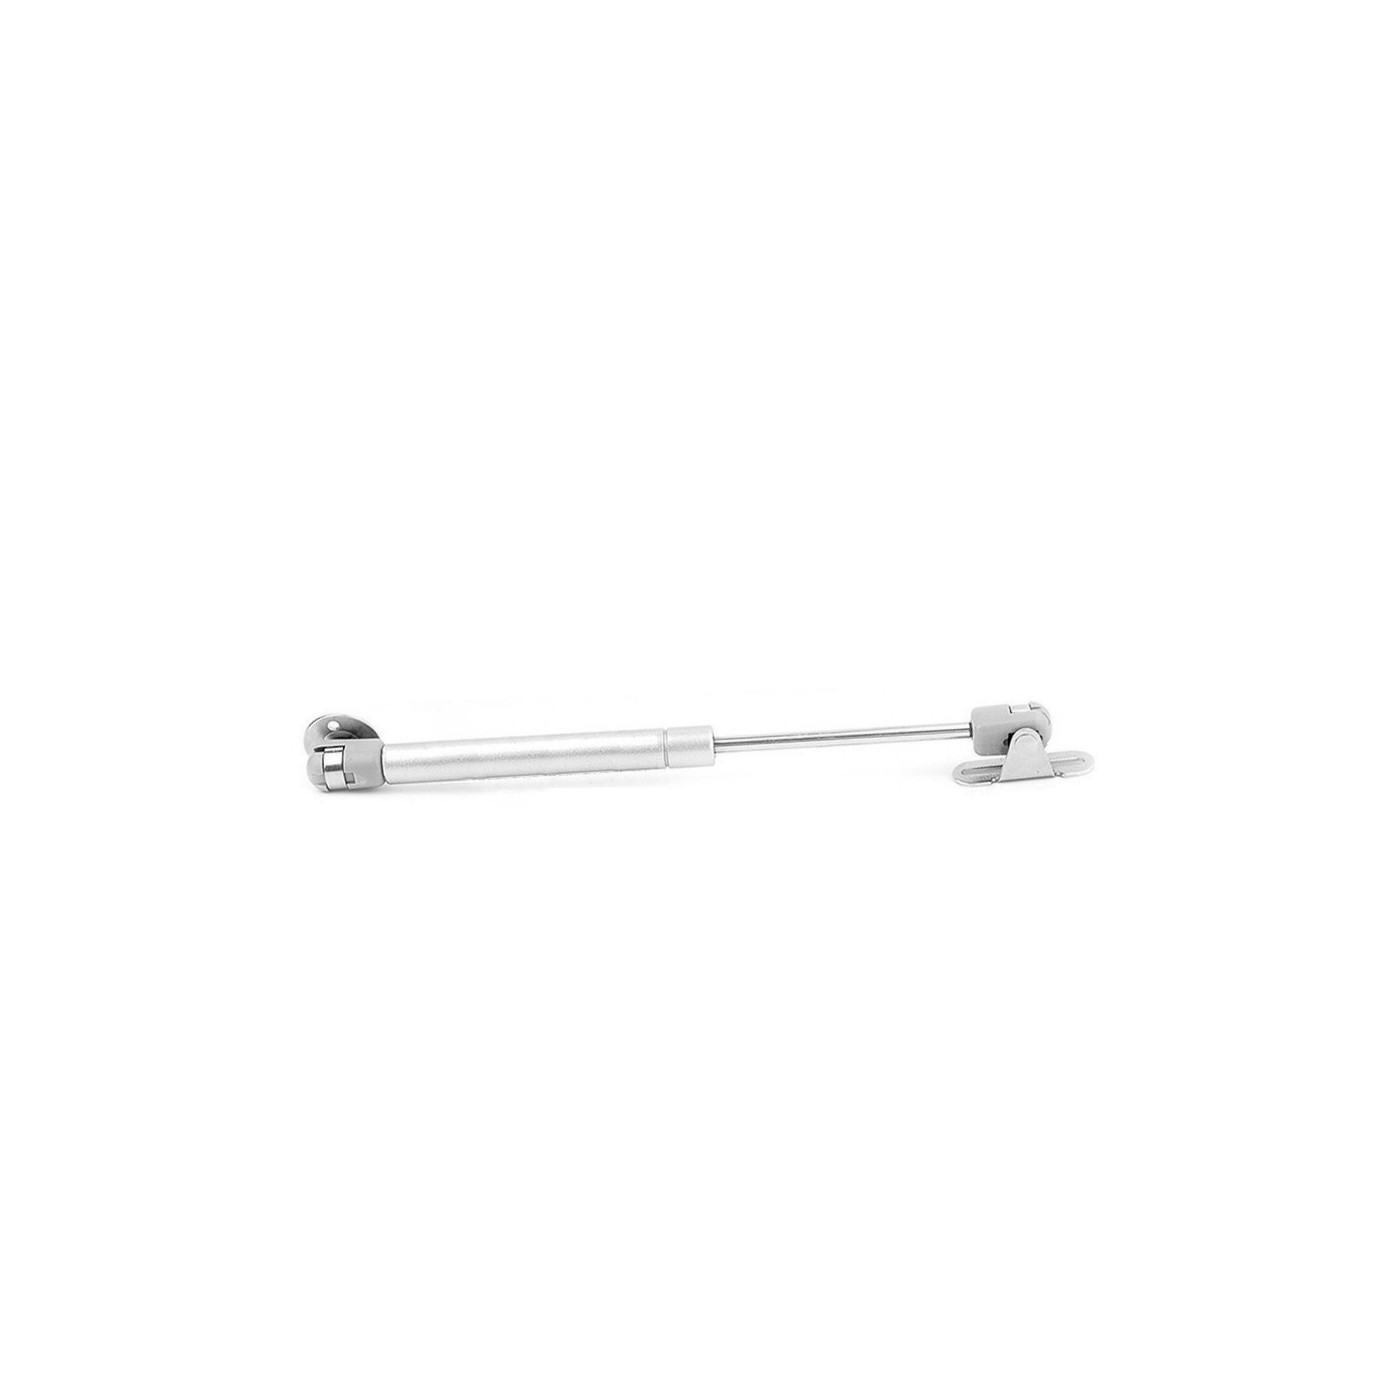 Universal gas spring with brackets (60N/6kg, 285 mm, silver)